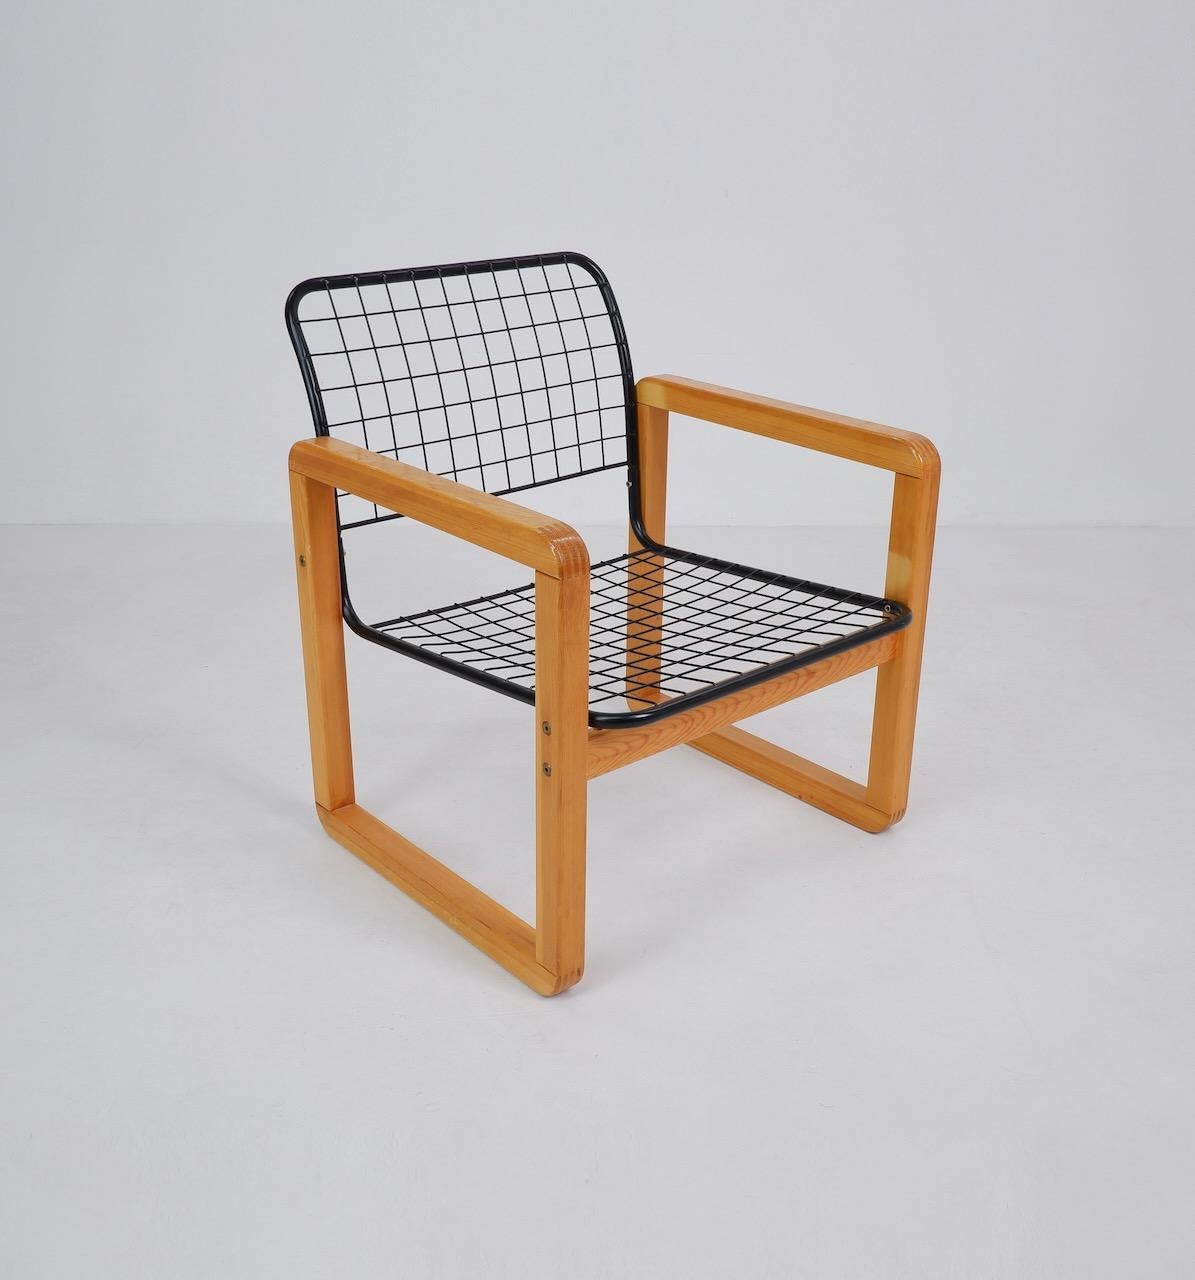 Pine wood and steel side chair designed by Knut & Marianne Hagberg in 1982 and produced by Ikea for 2 years in the early 1980s. This model is the rarer version of the more widely produced canvas upholstered alternative. 

Dimensions (cm, approx):